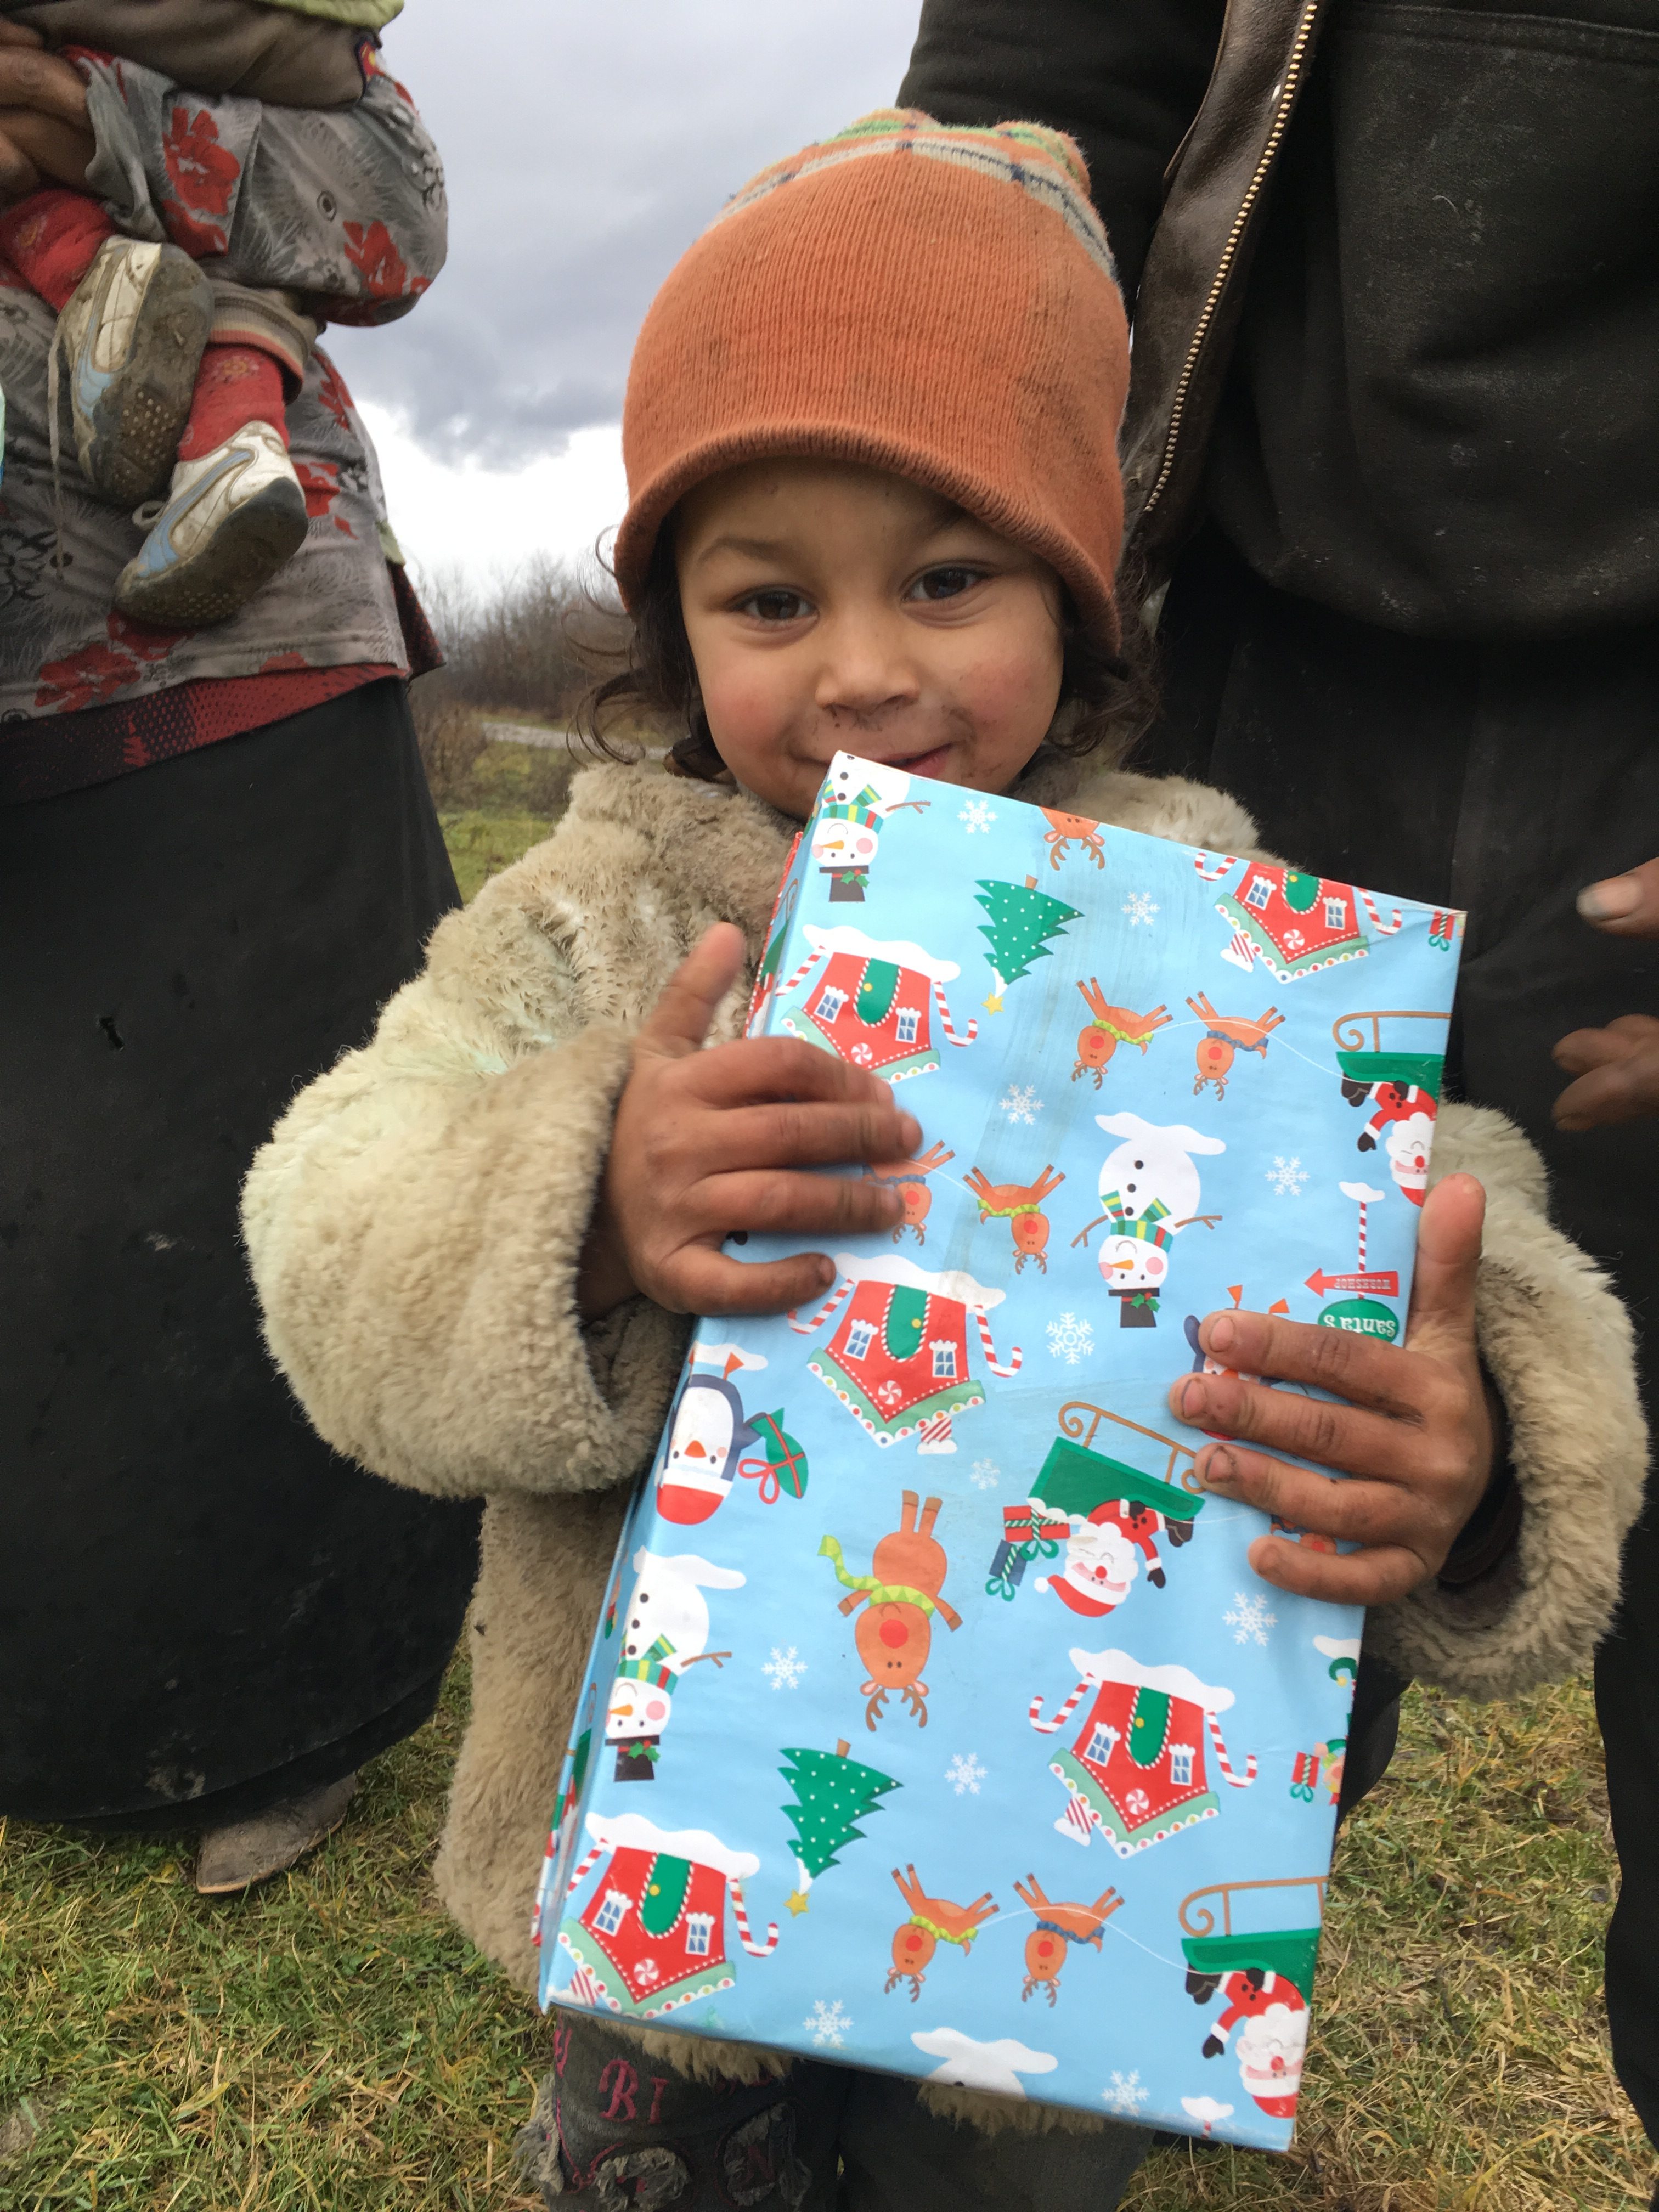 Agency Express Christmas shoebox appeal - Young boy with gift